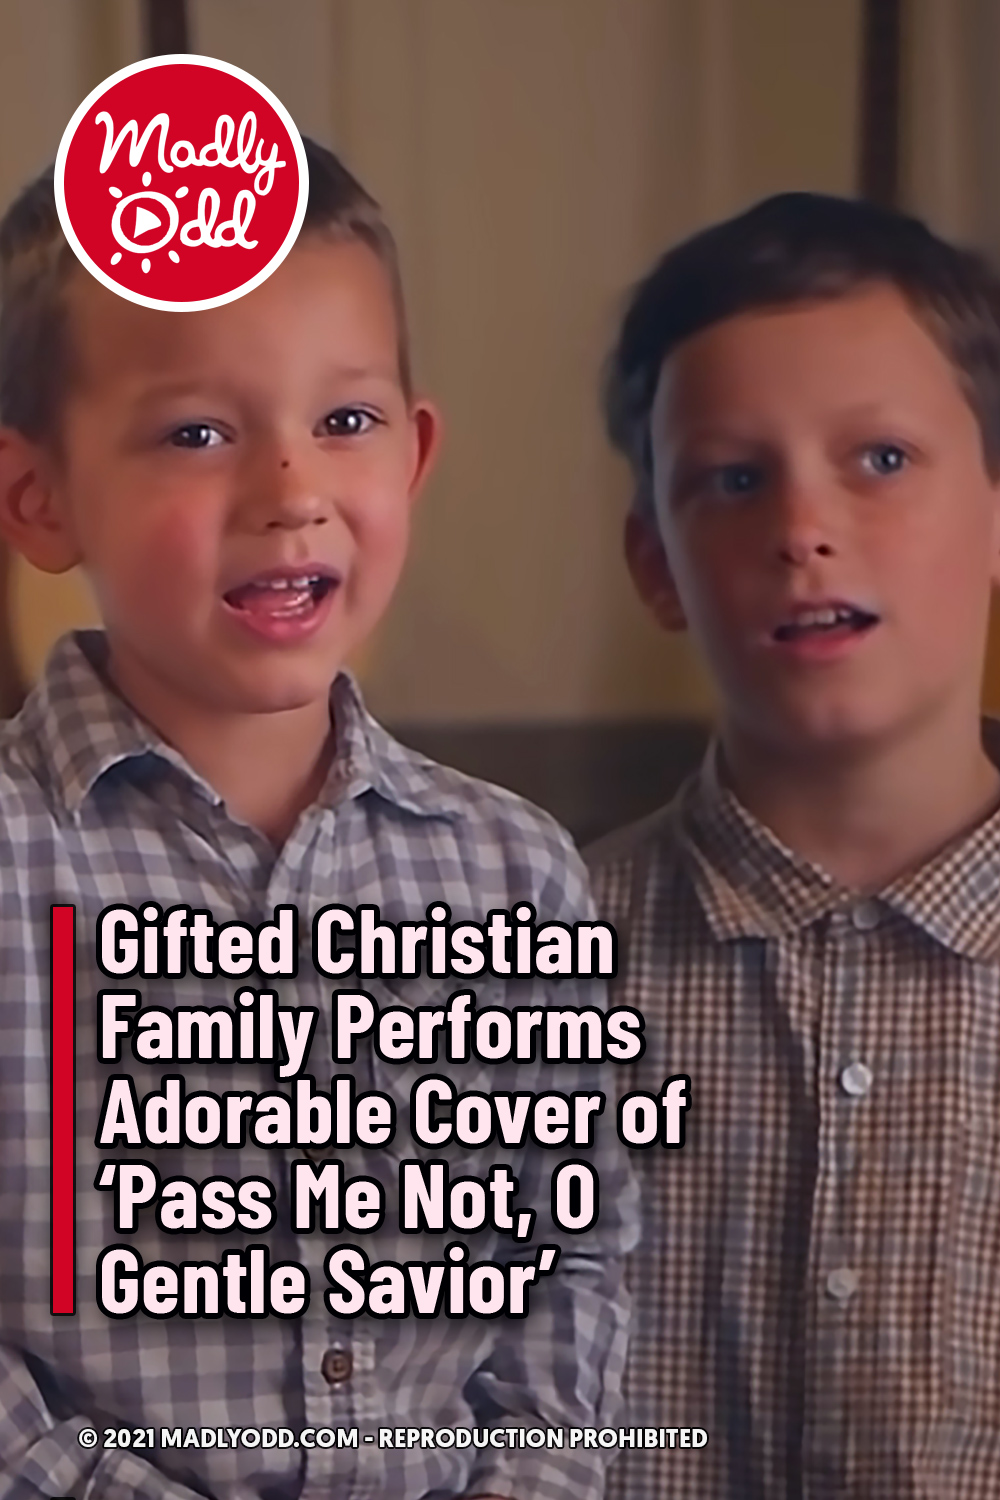 Gifted Christian Family Performs Adorable Cover of ‘Pass Me Not, O Gentle Savior’